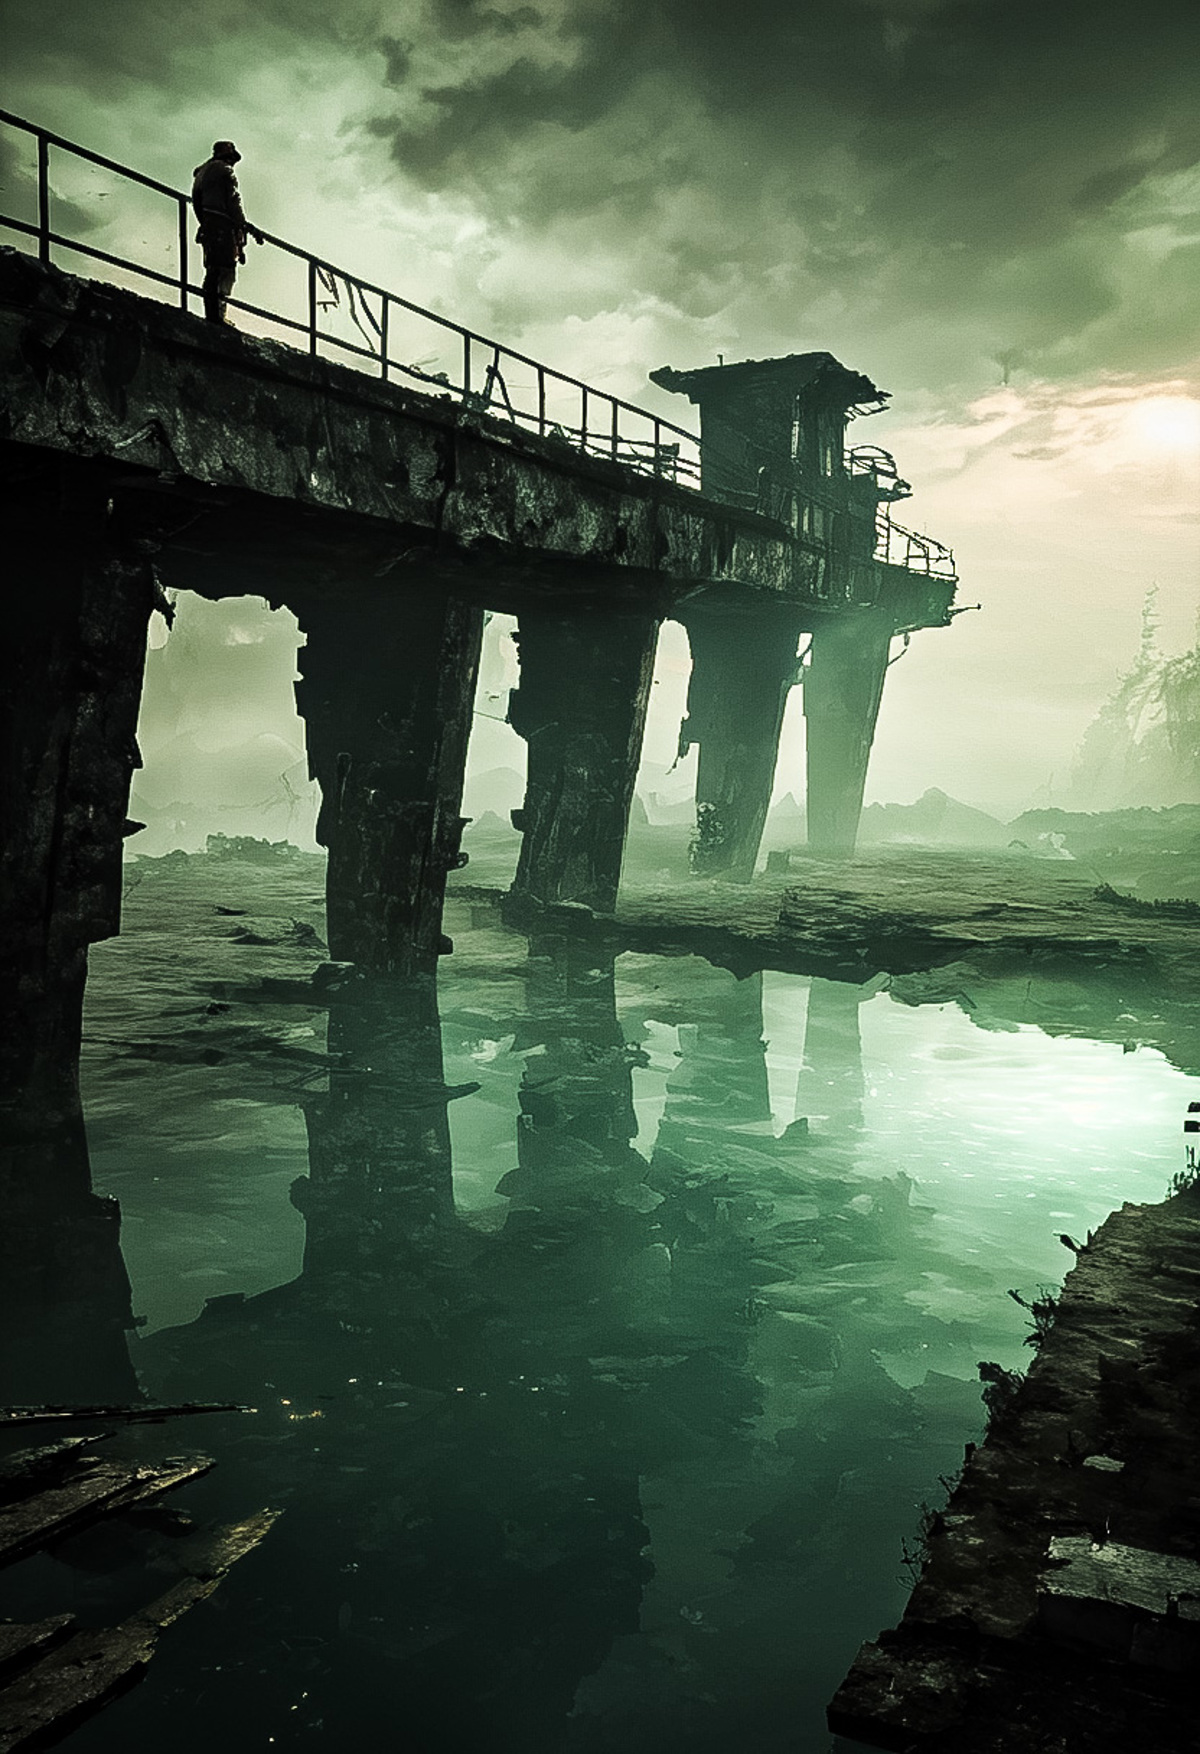 A ruined pier with a bridge over a foggy lake.